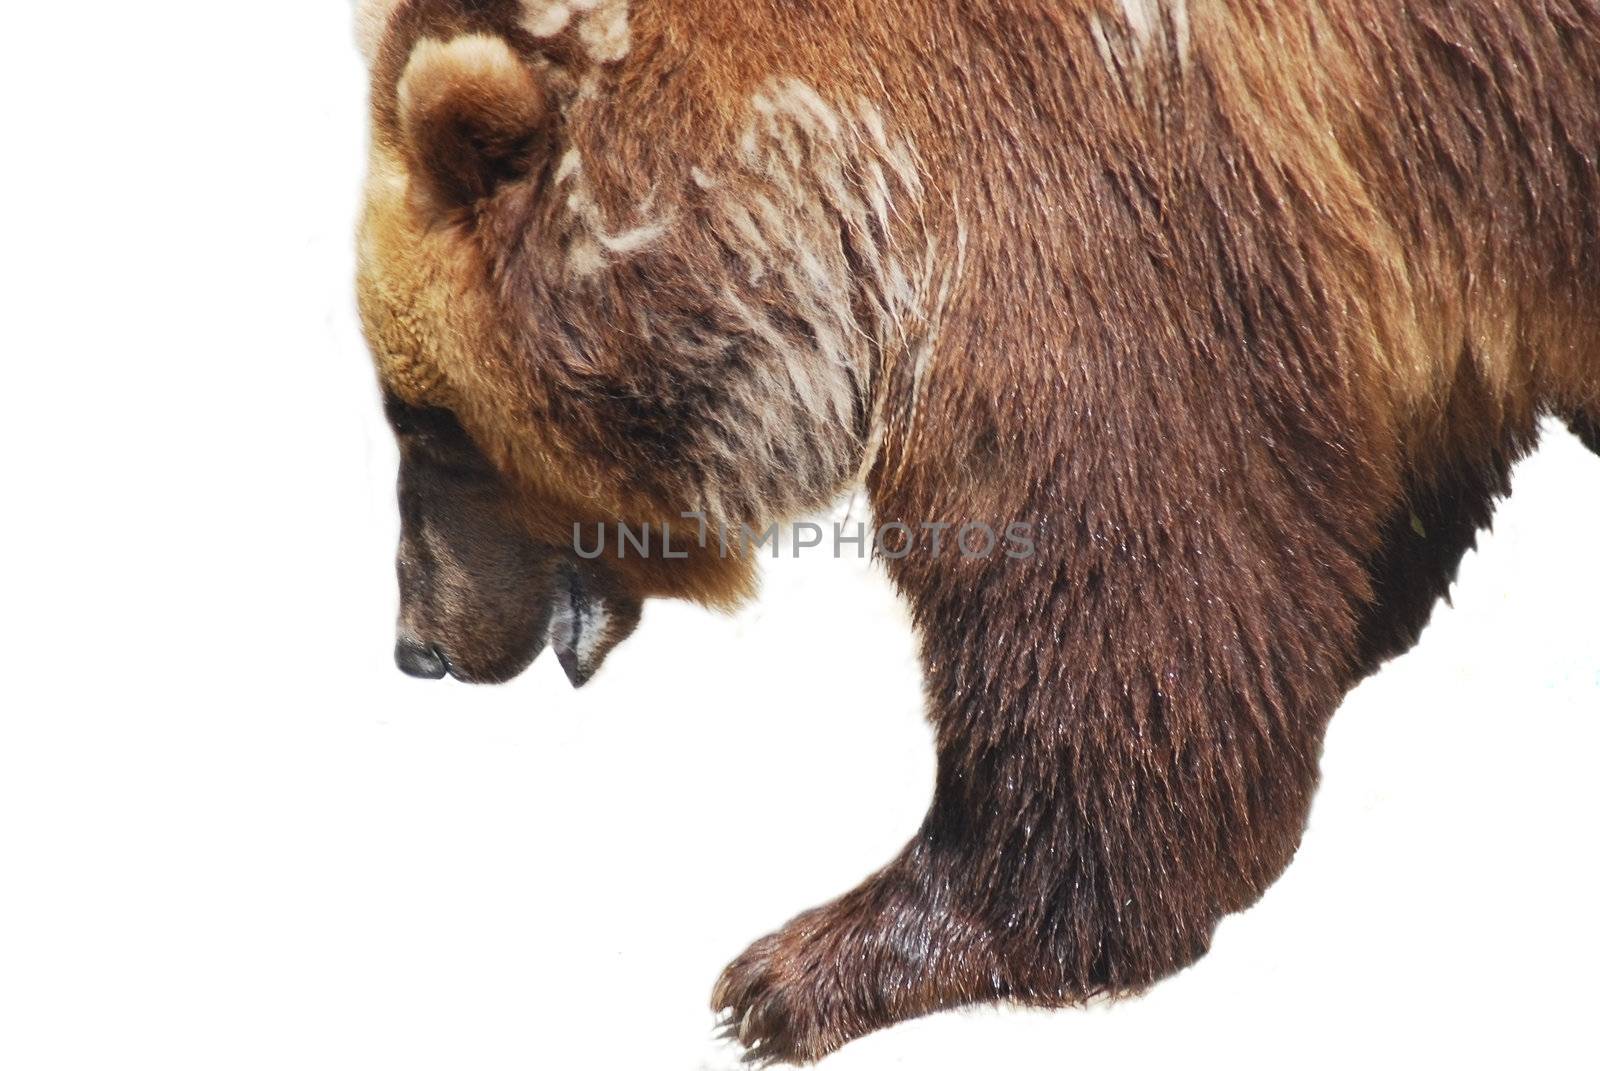 The brown bear close up isolated on white, wild life by svtrotof